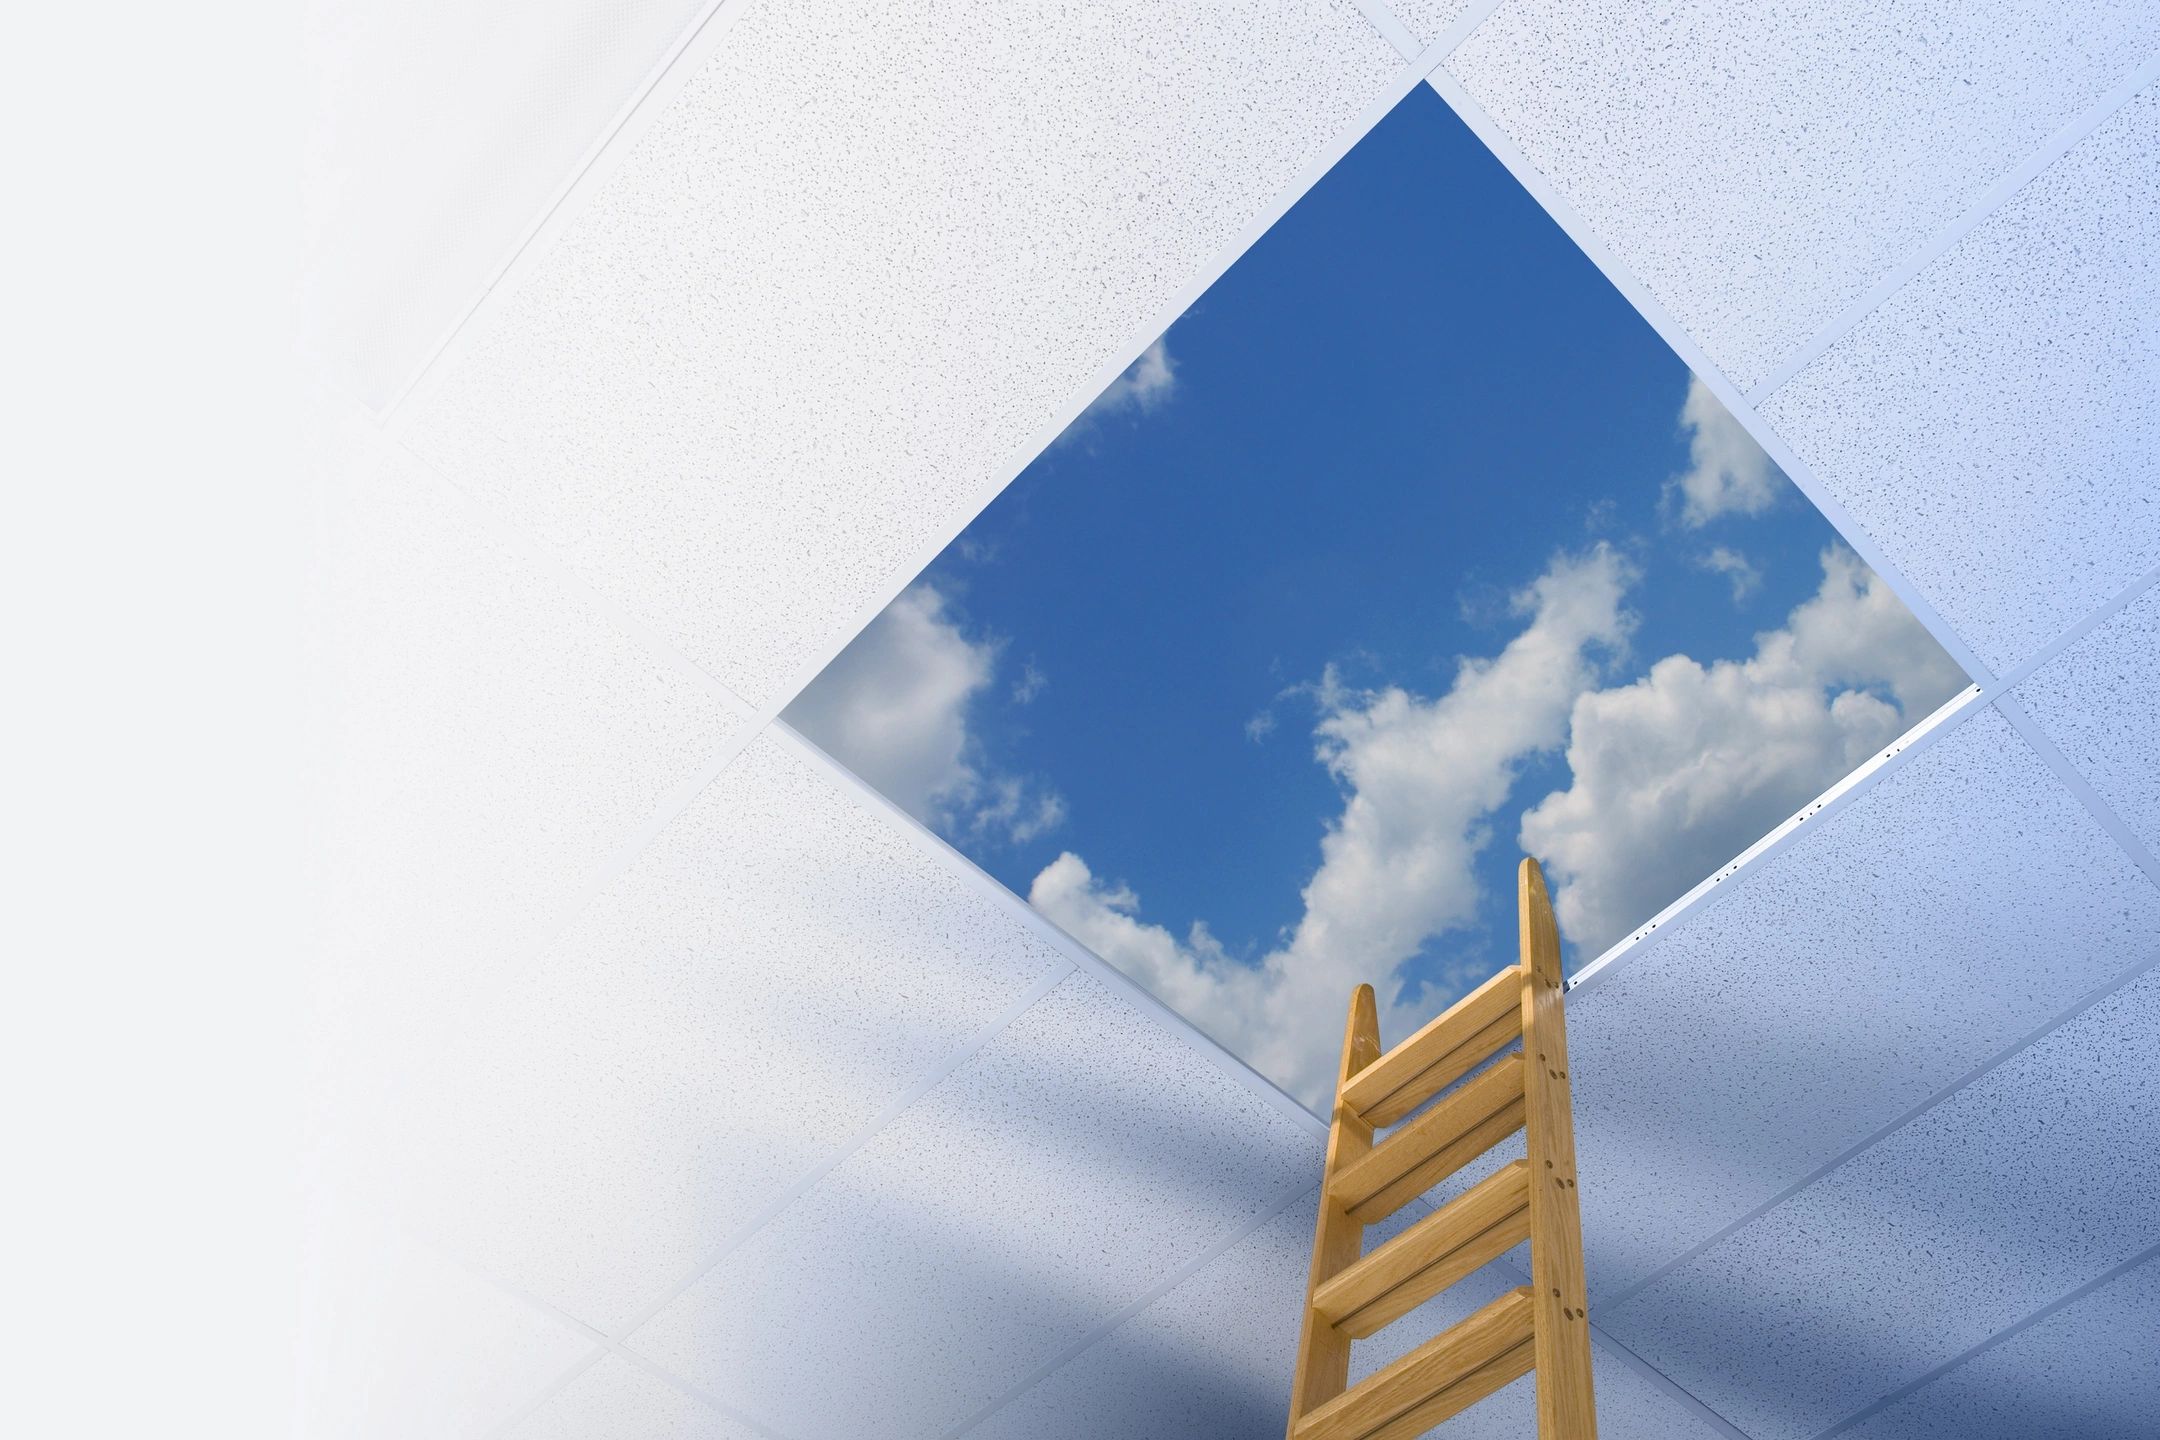 tThe top of a ladder is propped against an open ceiling with a cloudy blue sky visible above.